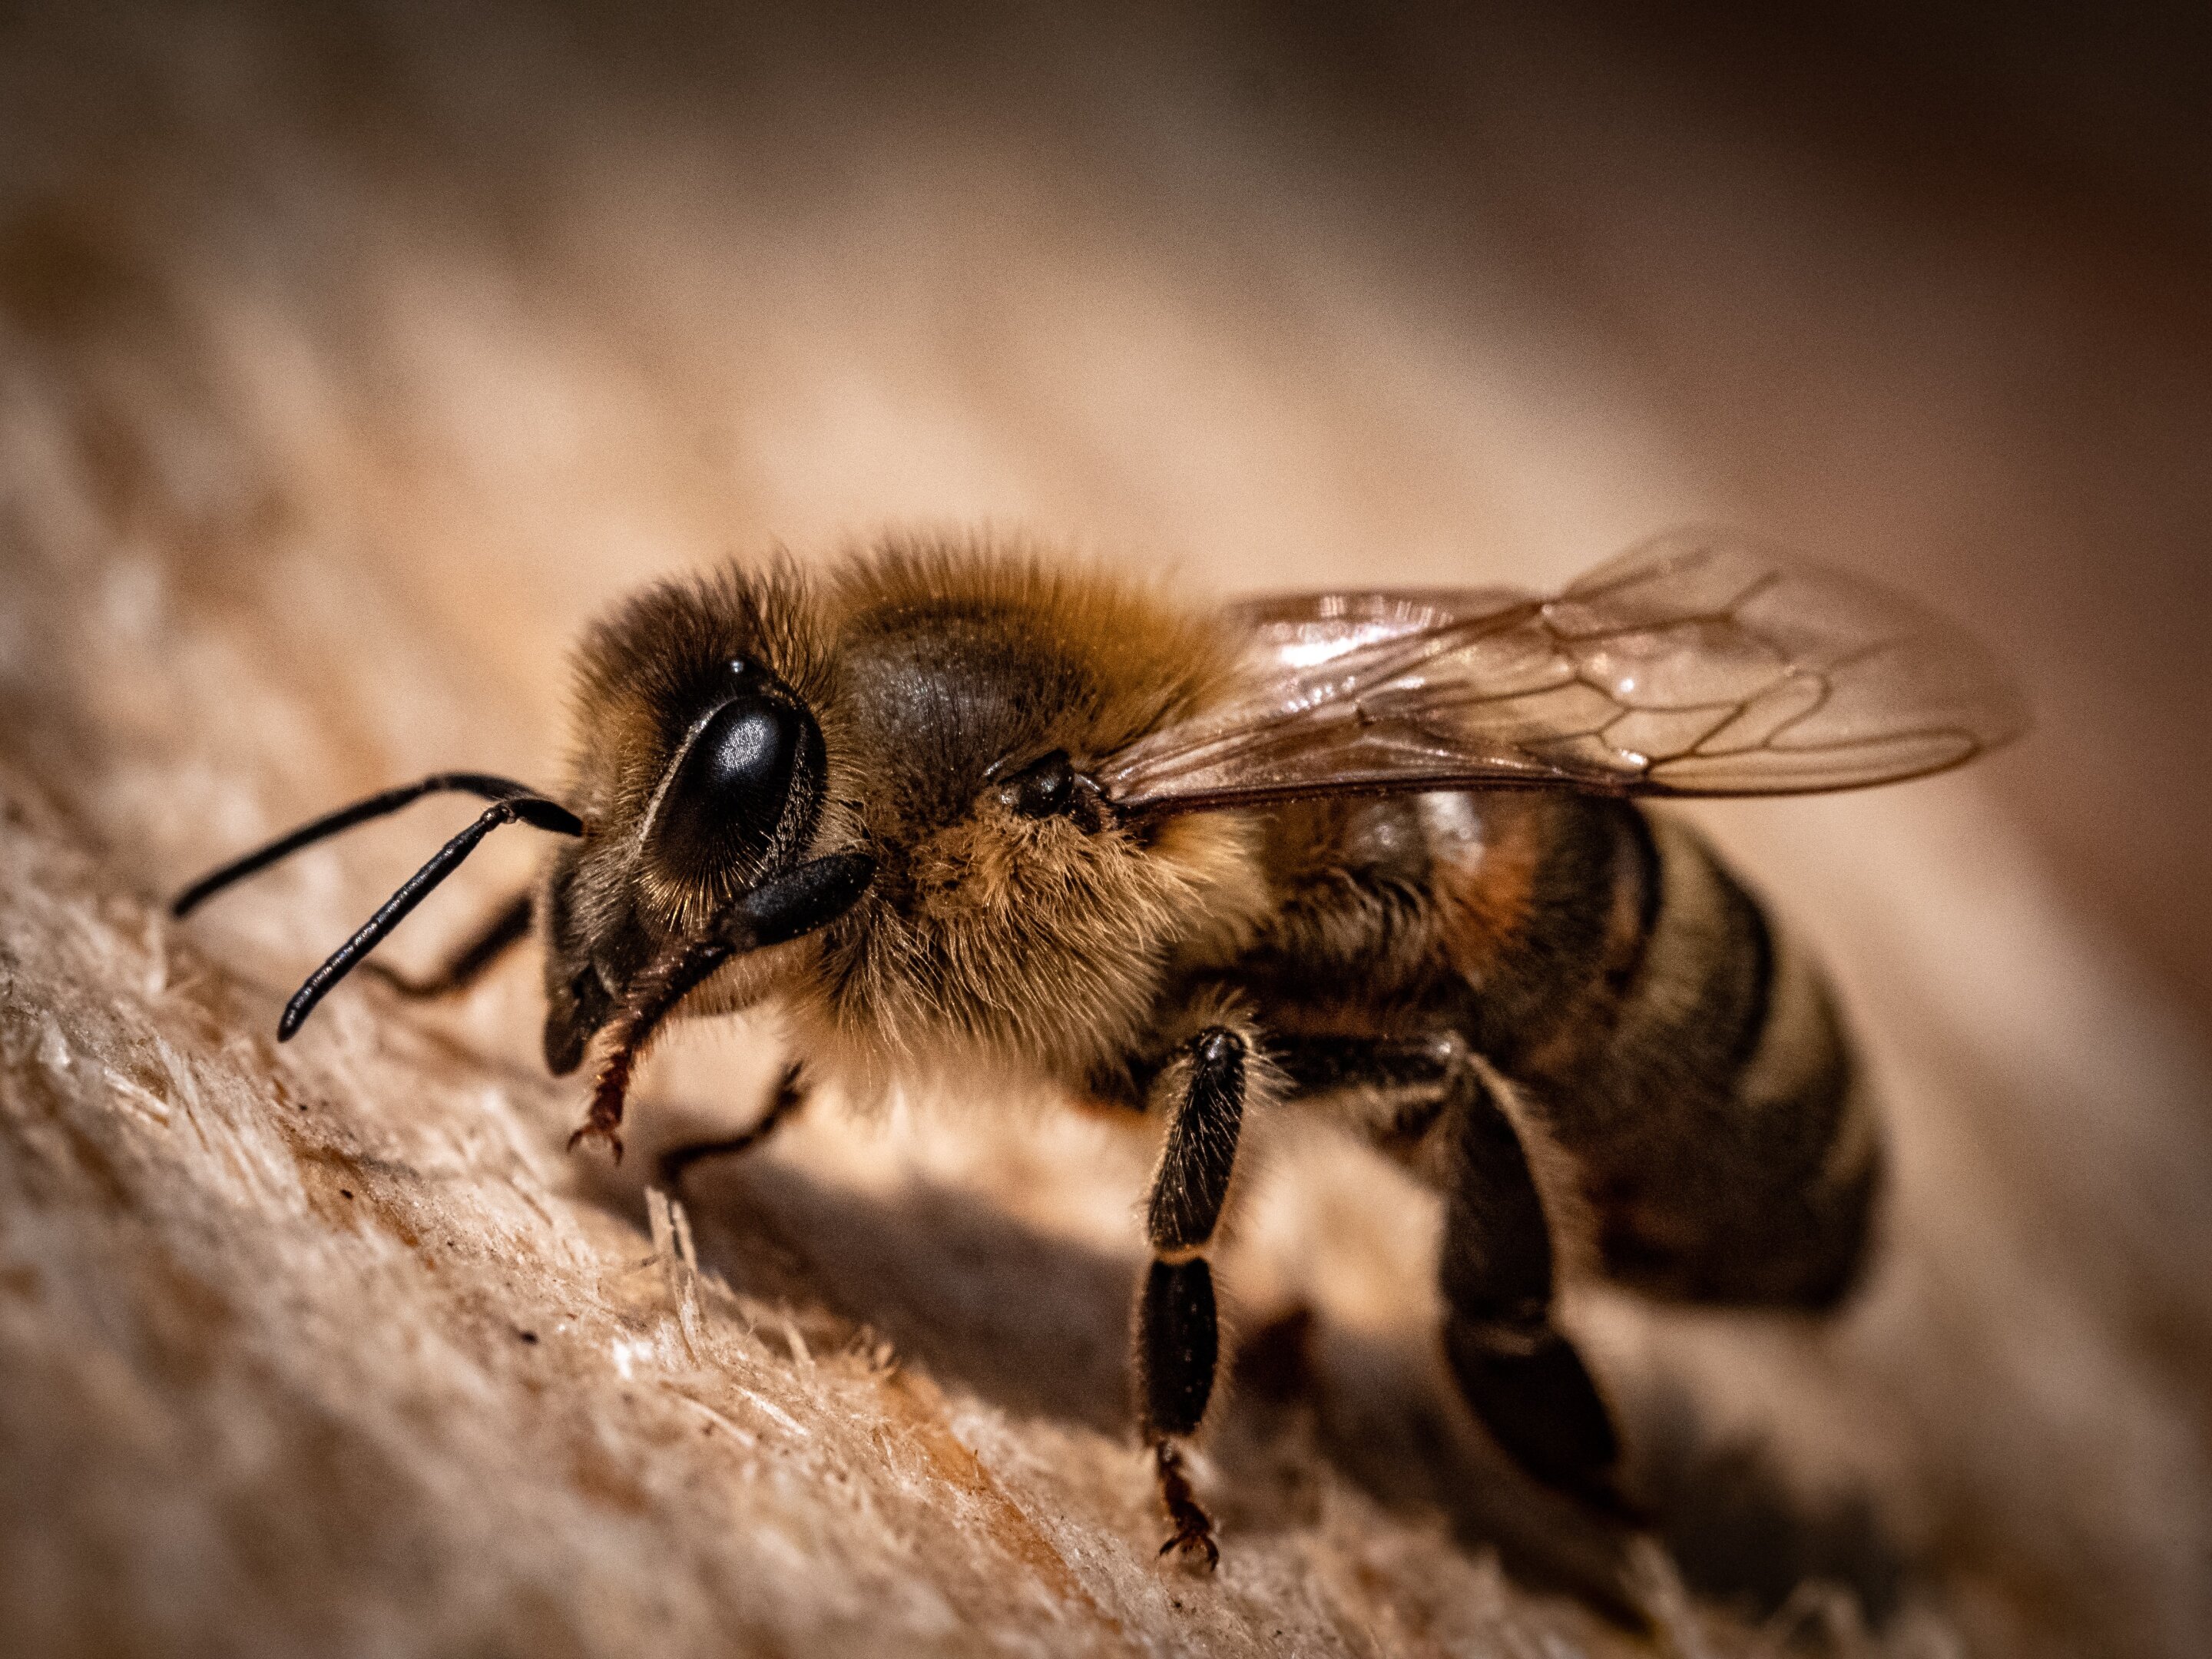 Bees’ ‘waggle dance’ may revolutionize how robots talk to each other in disaster zones